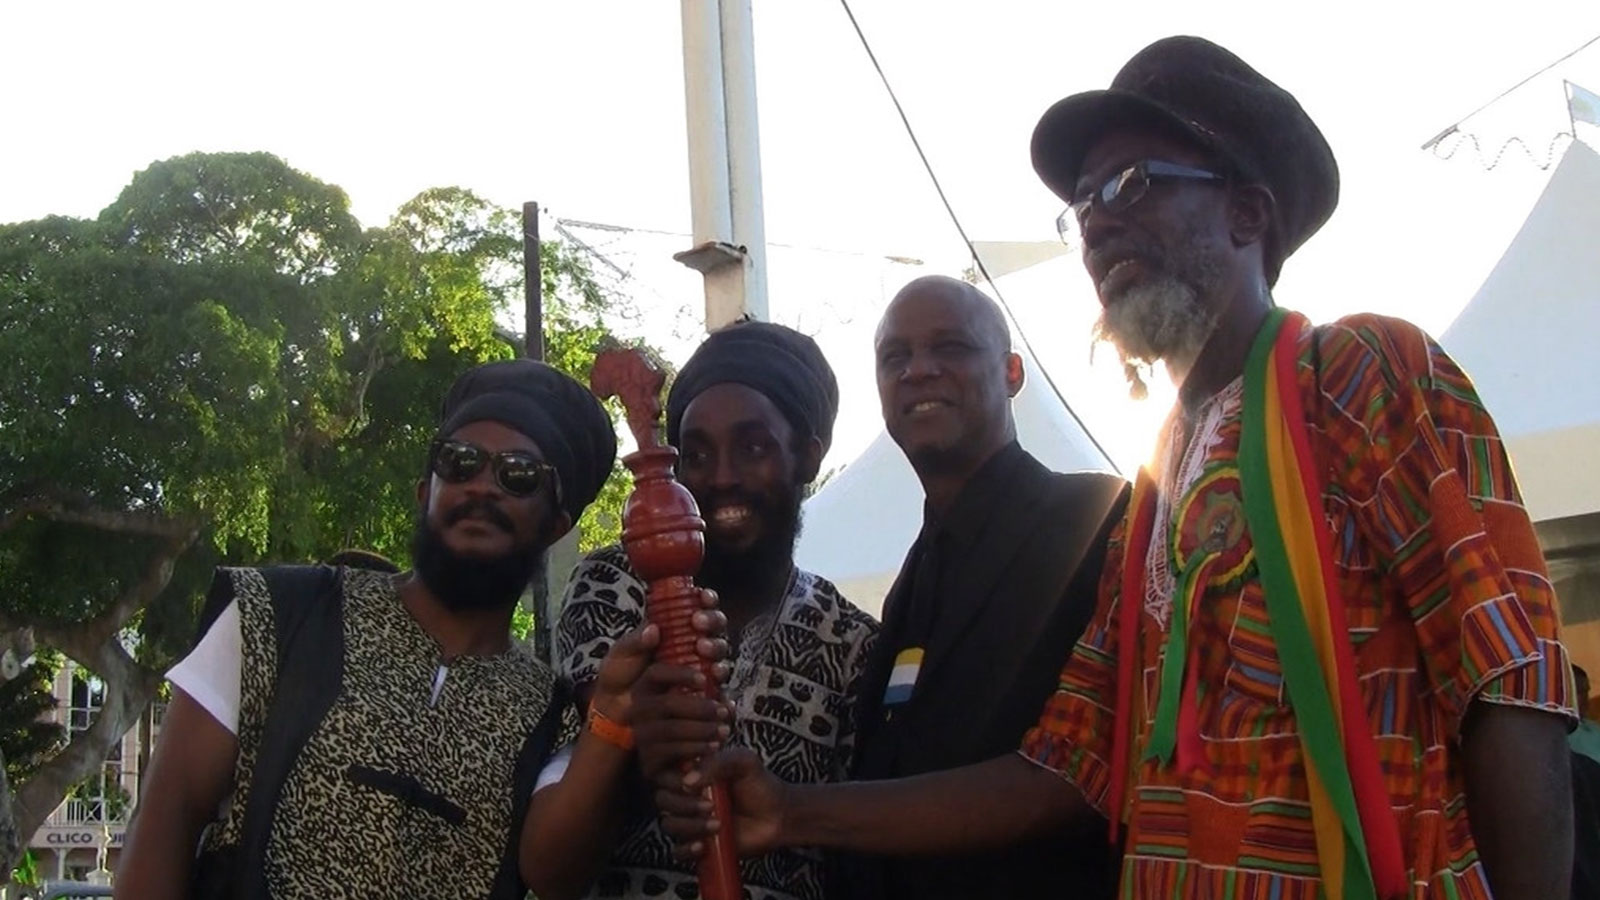 We will never give up the slavery reparations fight, say Caribbean Rastafarians